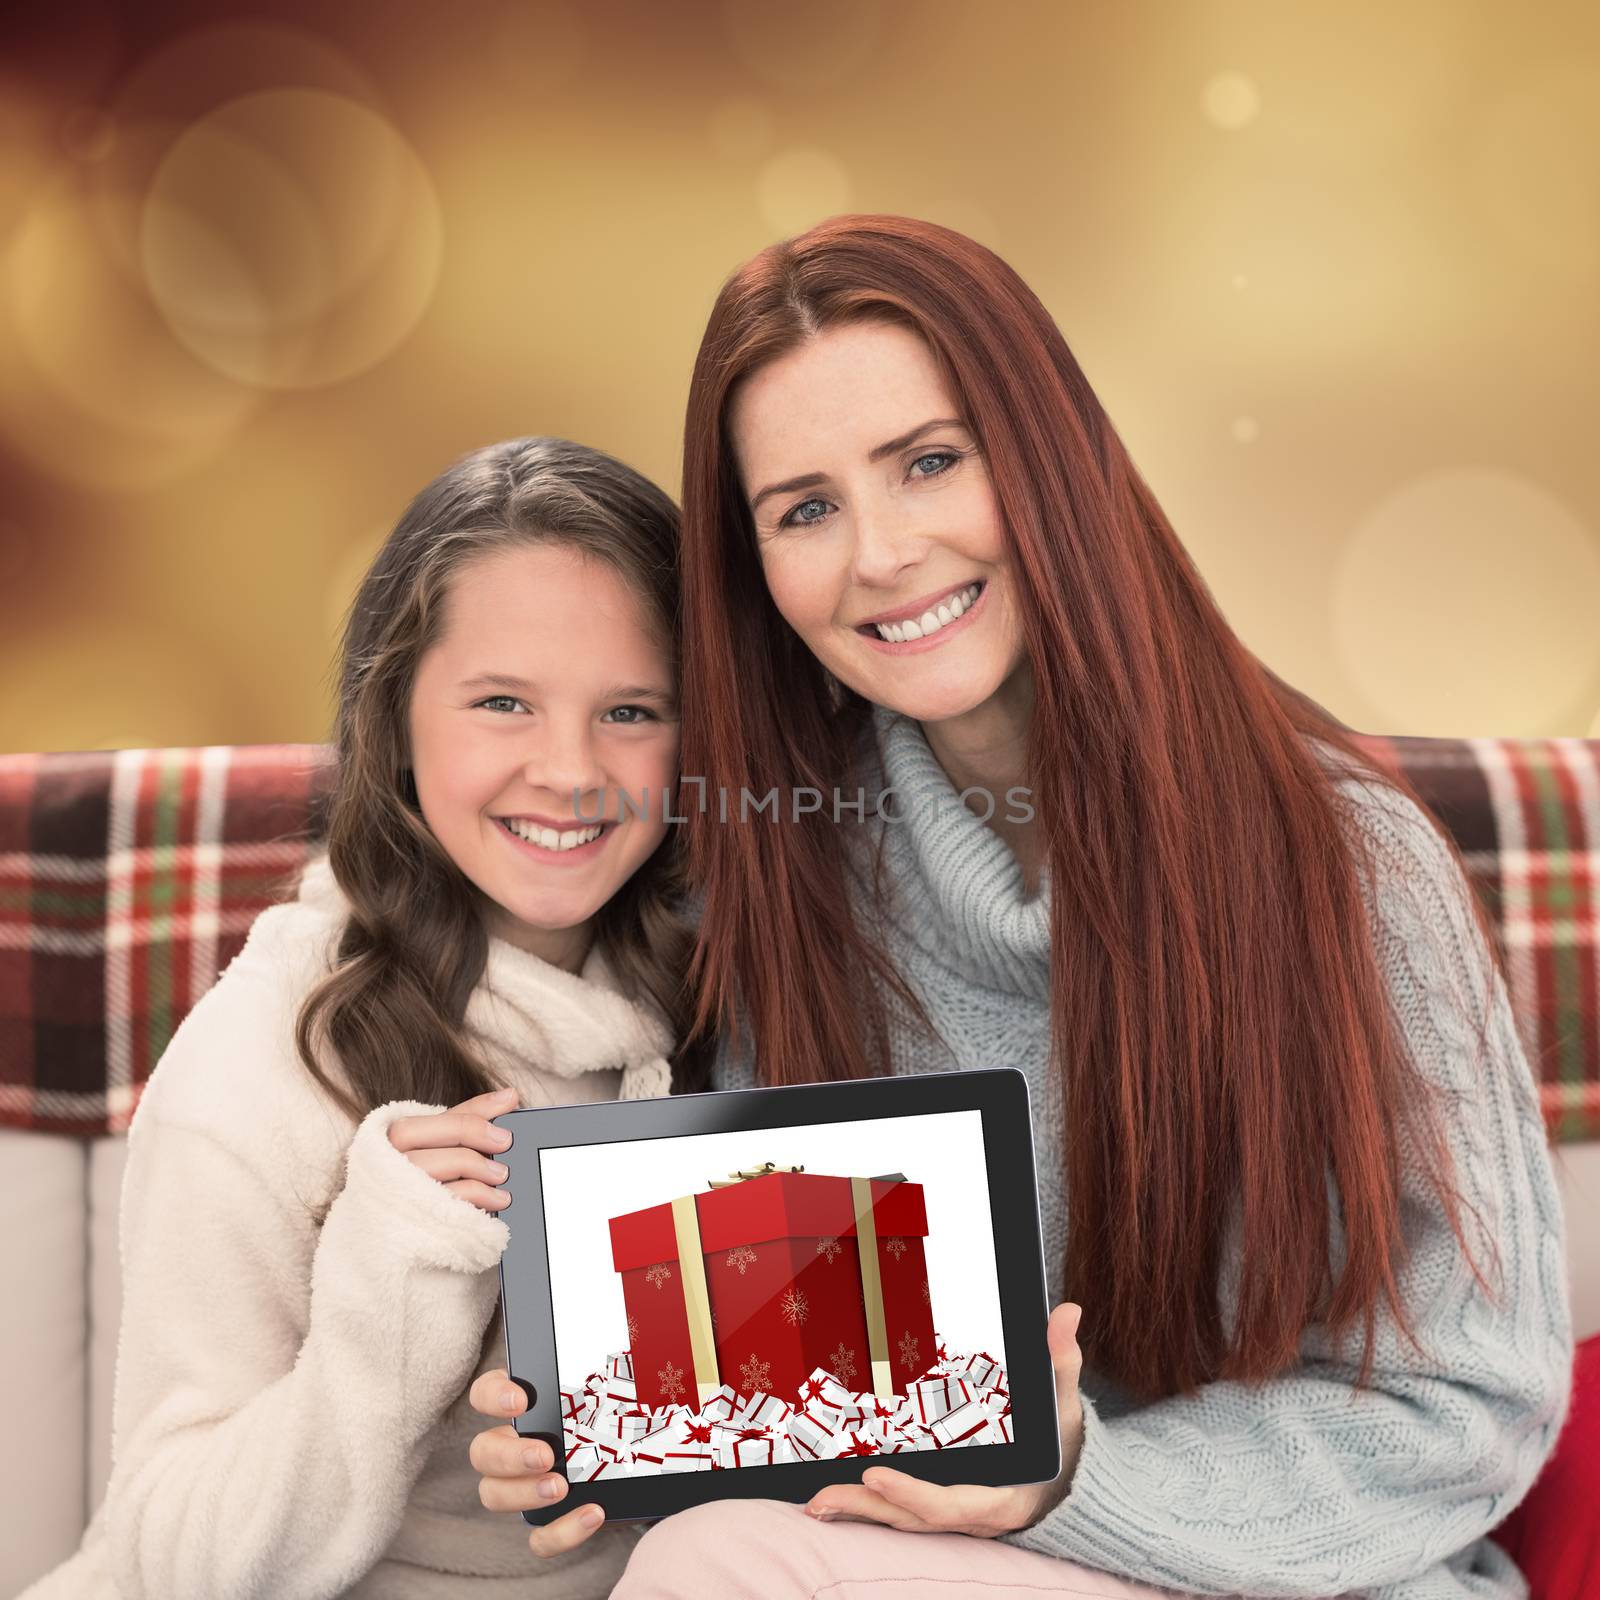 Mother and daughter showing tablet against orange abstract light spot design